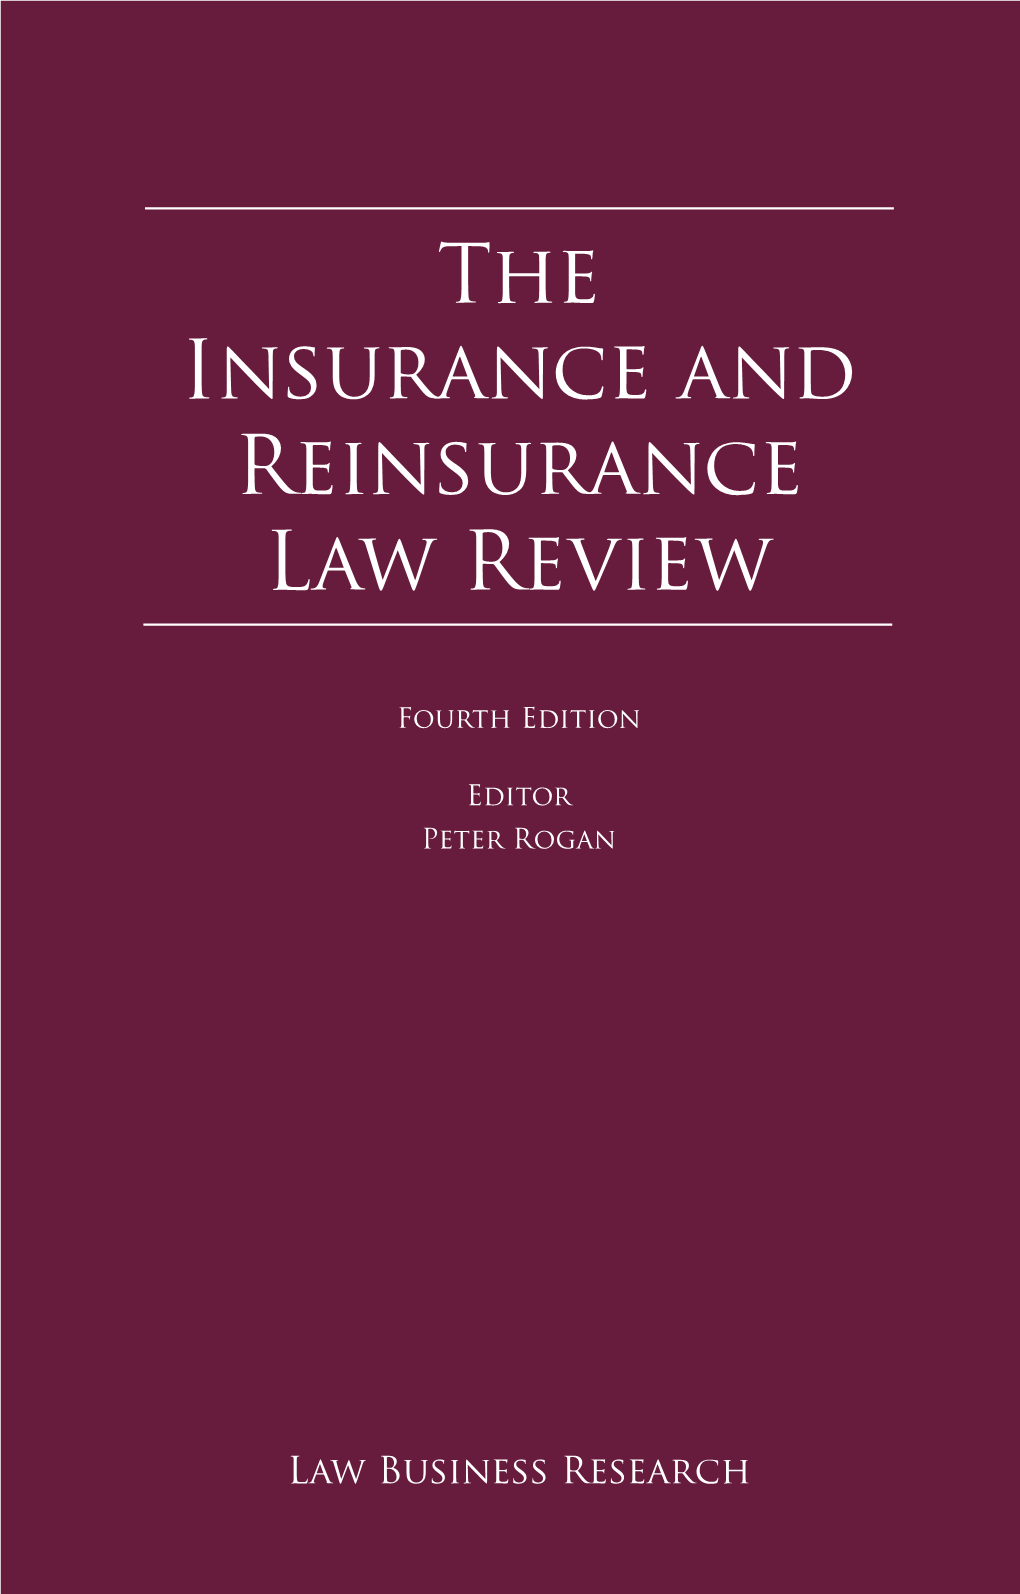 The Insurance and Reinsurance Law Review Reproduced with Permission from Law Business Research Ltd